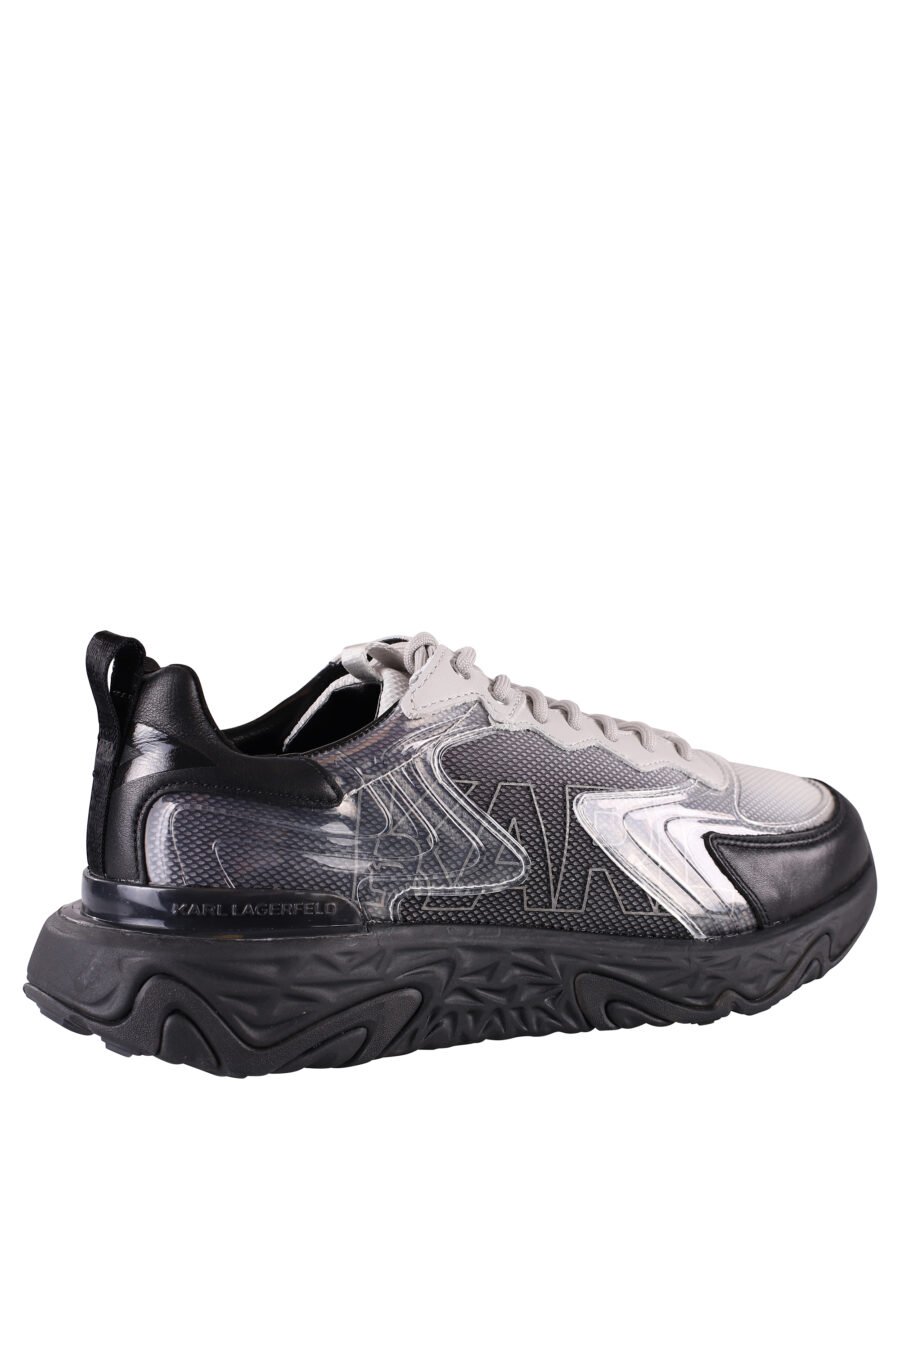 Black "blaze" trainers with white and transparent details - IMG 8478